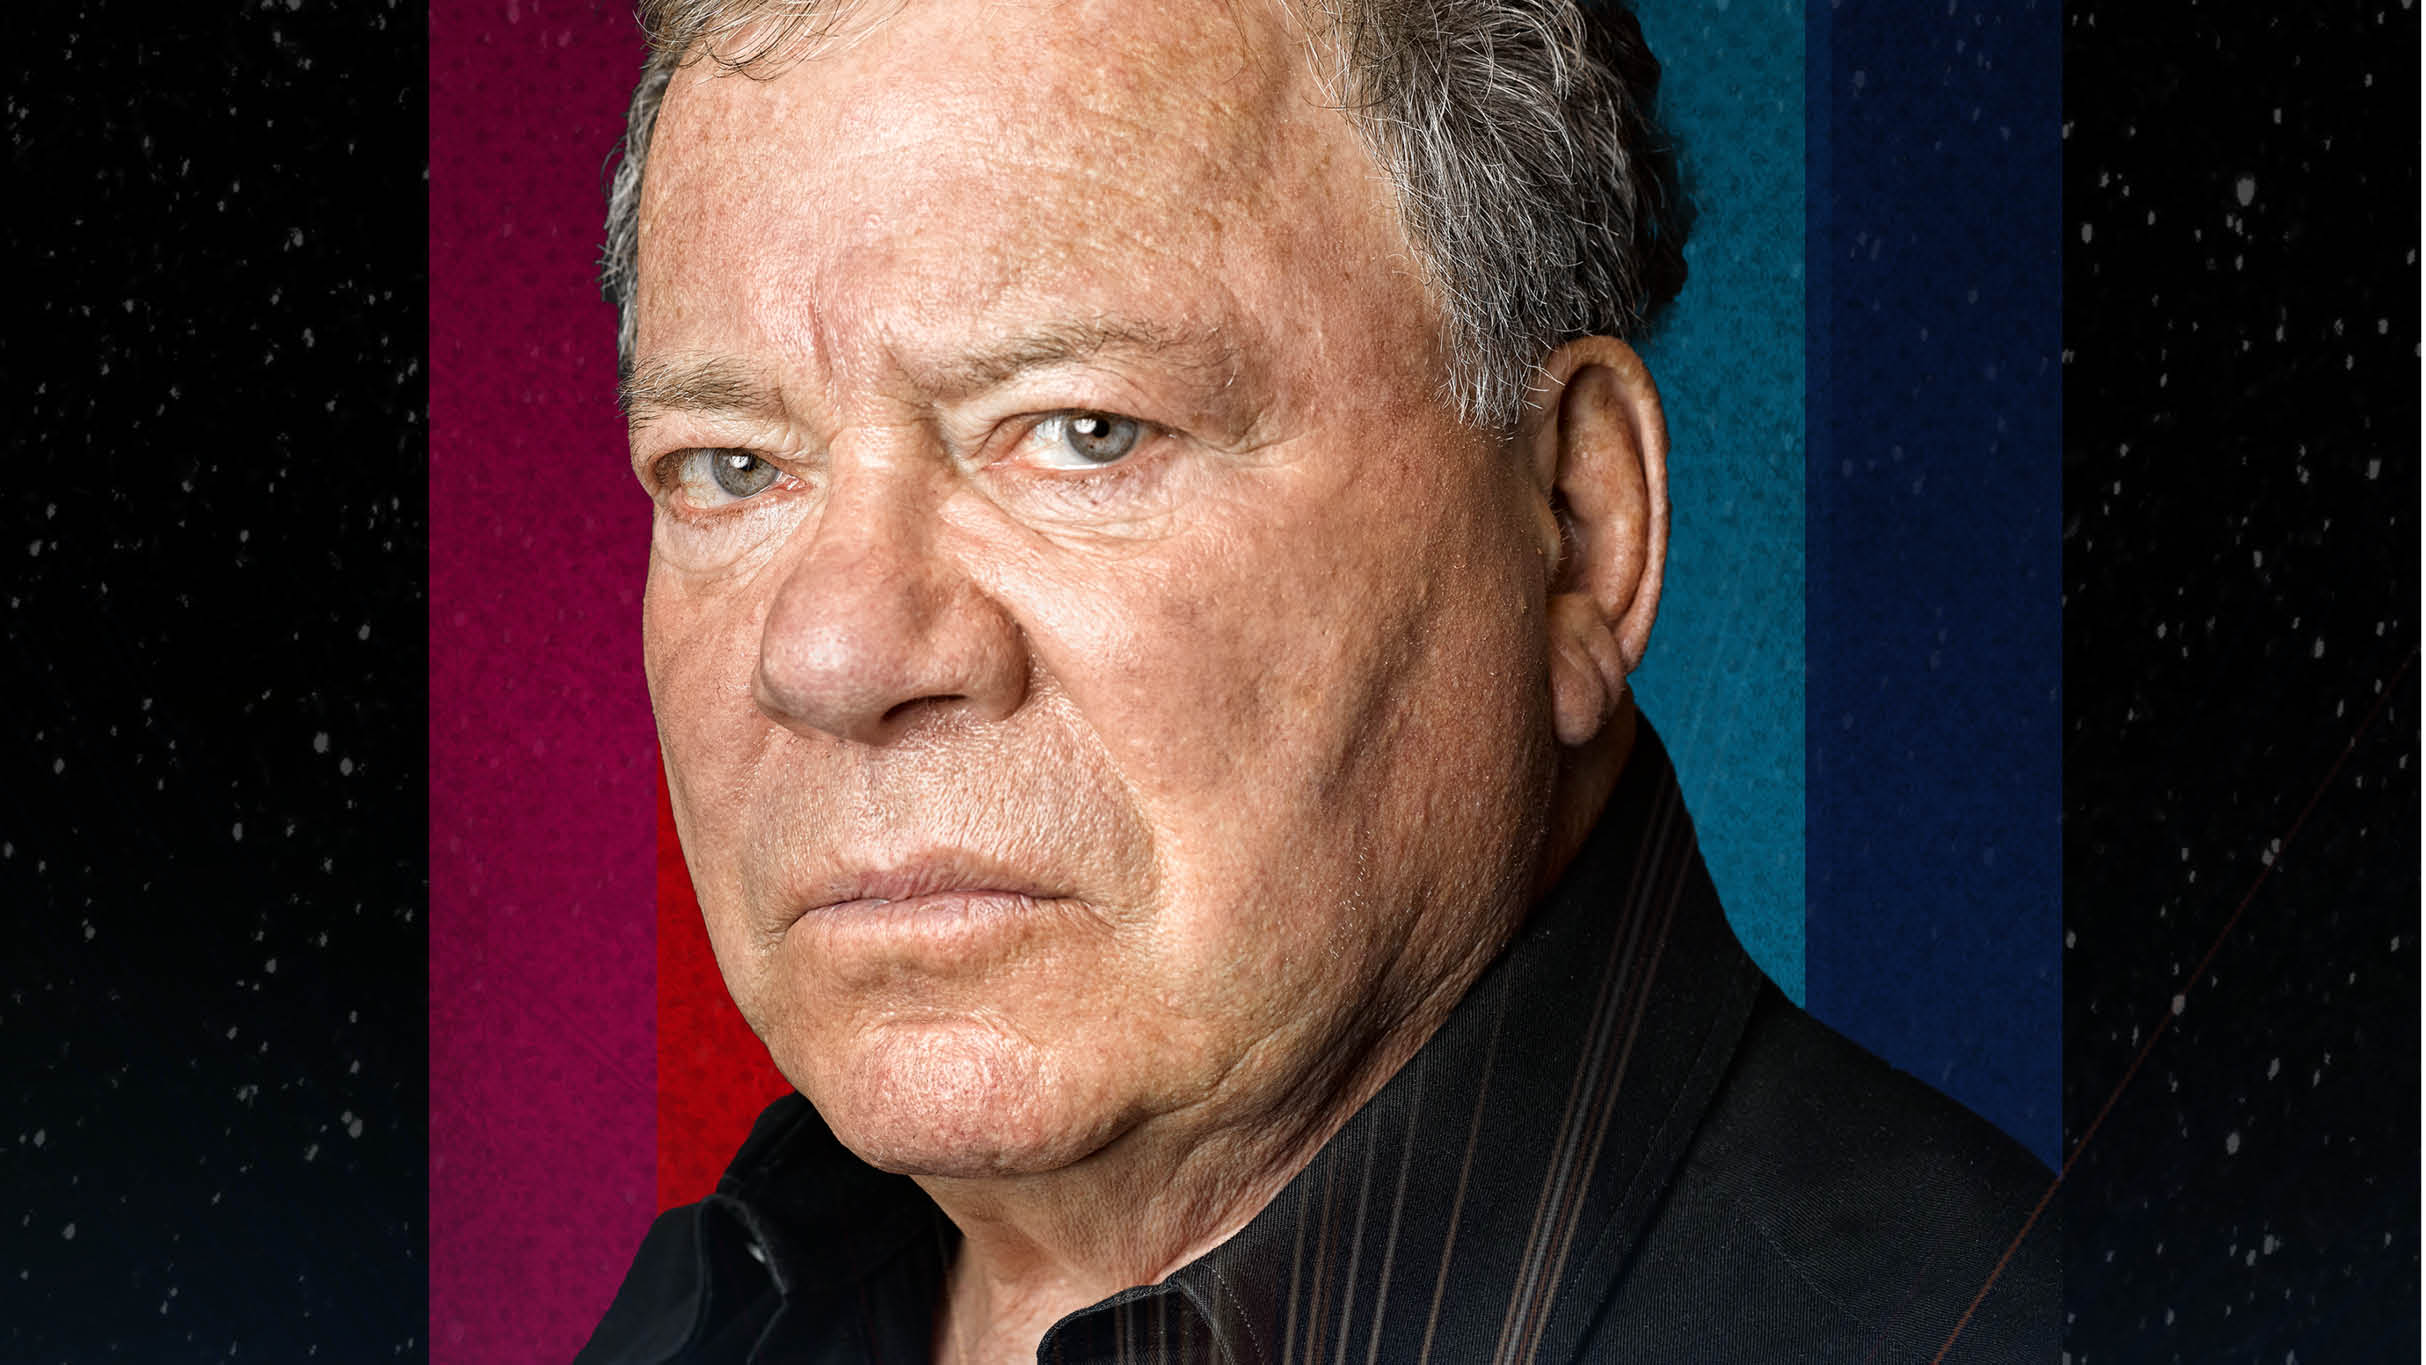 members only presale code to William Shatner Live On-stage with Star Trek II: The Wrath of Khan face value tickets in Warren at Packard Music Hall